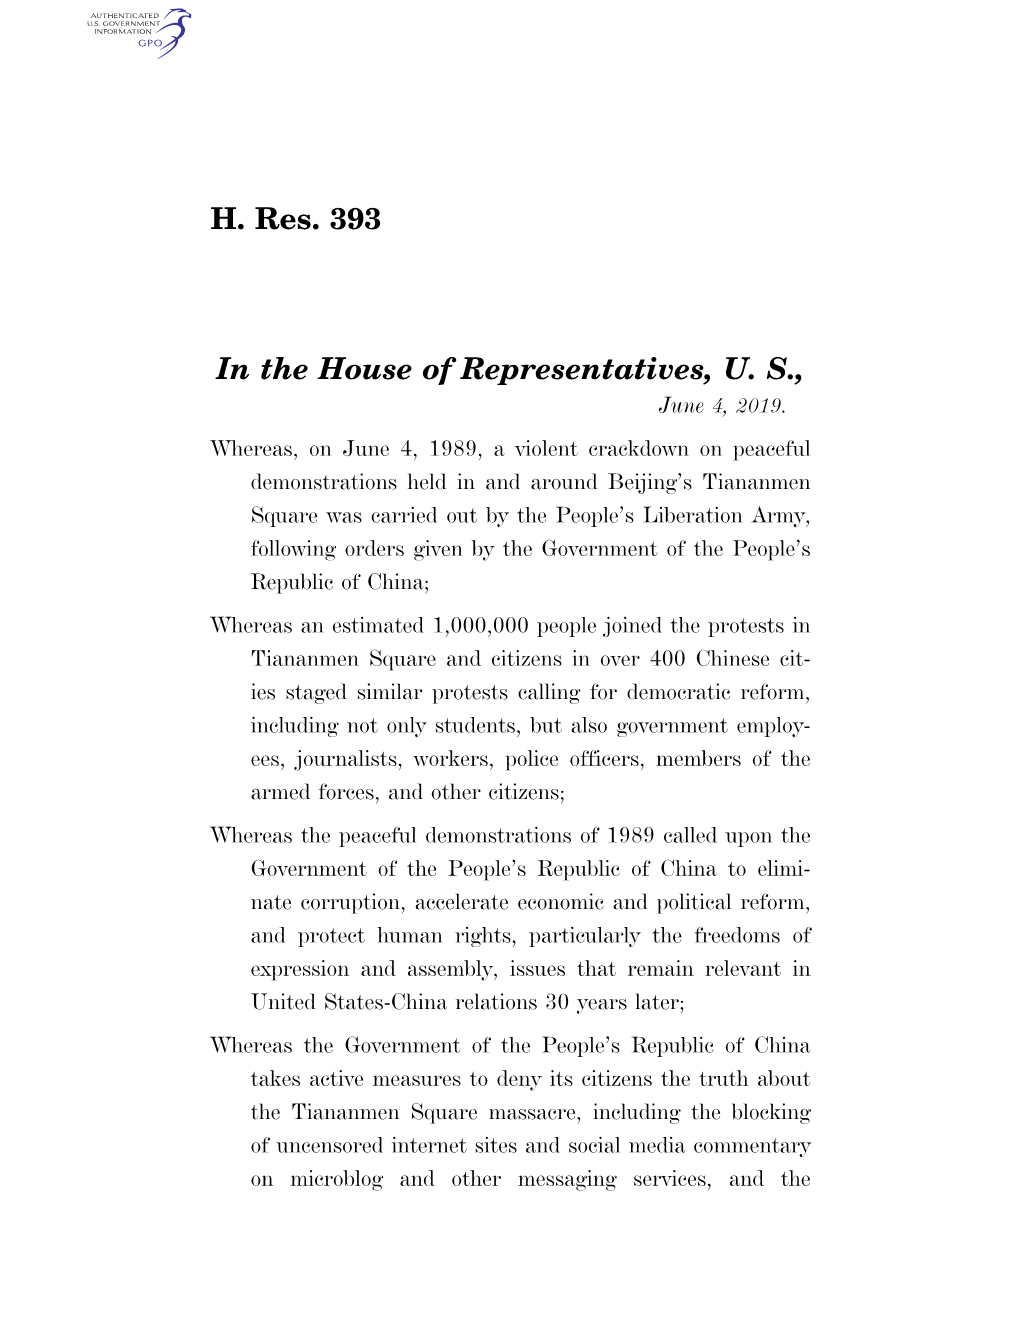 H. Res. 393 in the House of Representatives, U